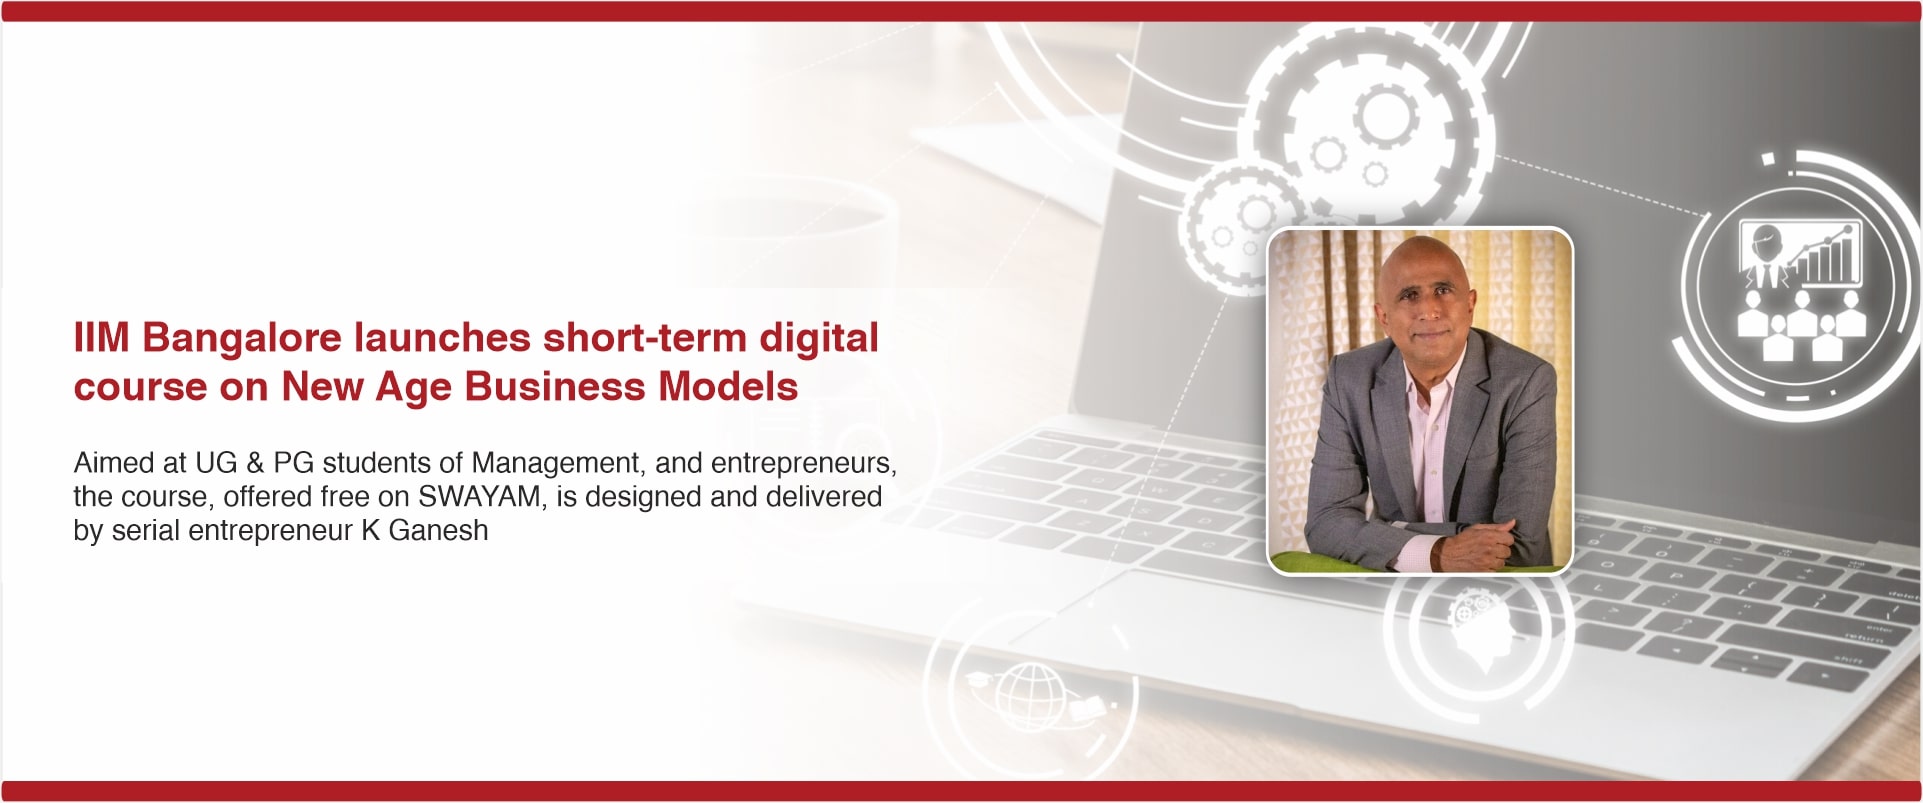 IIM Bangalore launches short-term digital course on New Age Business Models 